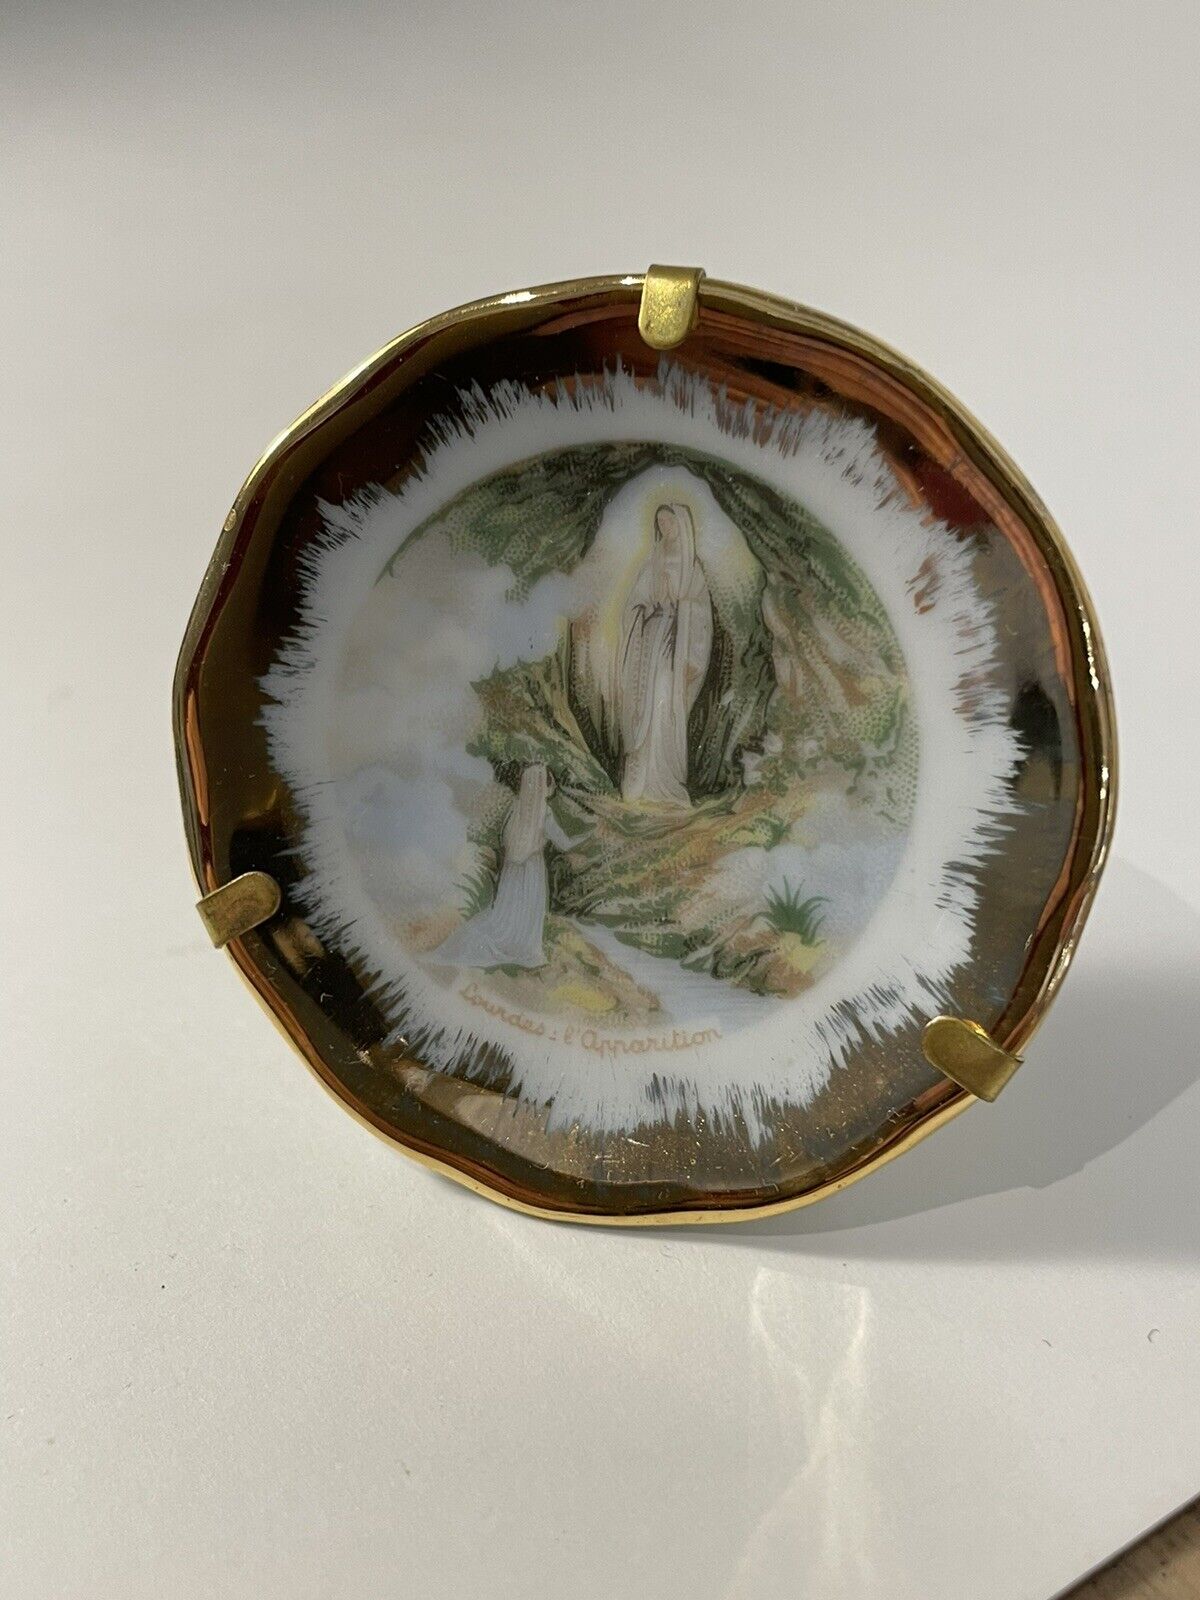 limoges - miniature plate - The apparition of the Virgin Mary